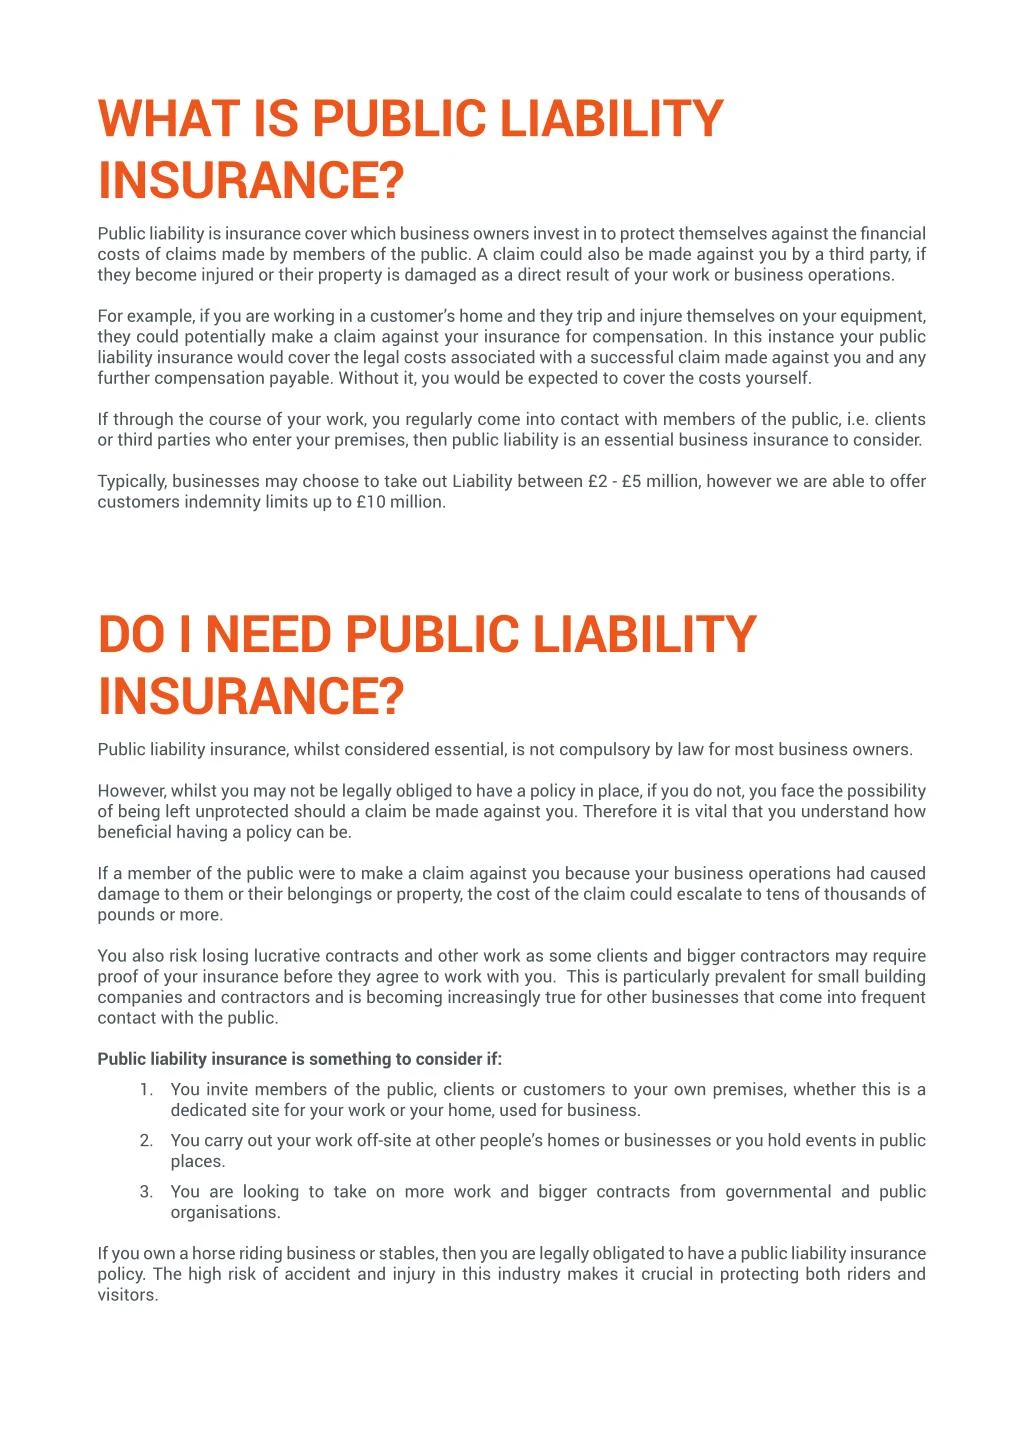 PPT Ultimate Guide to Public Liability Insurance PowerPoint Presentation ID7488536